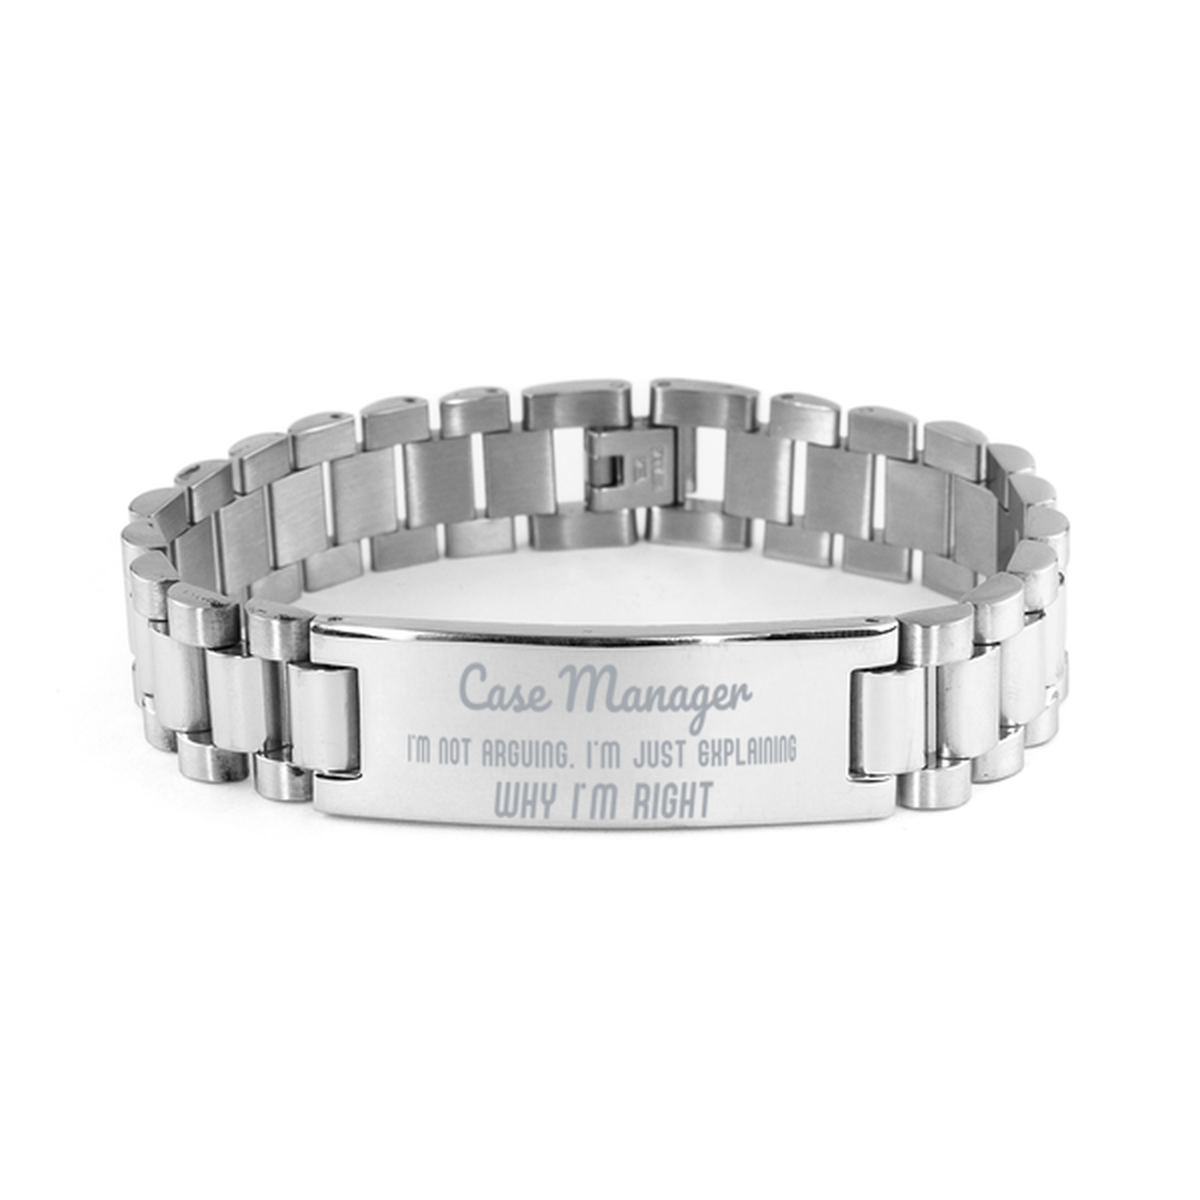 Case Manager I'm not Arguing. I'm Just Explaining Why I'm RIGHT Ladder Stainless Steel Bracelet, Graduation Birthday Christmas Case Manager Gifts For Case Manager Funny Saying Quote Present for Men Women Coworker